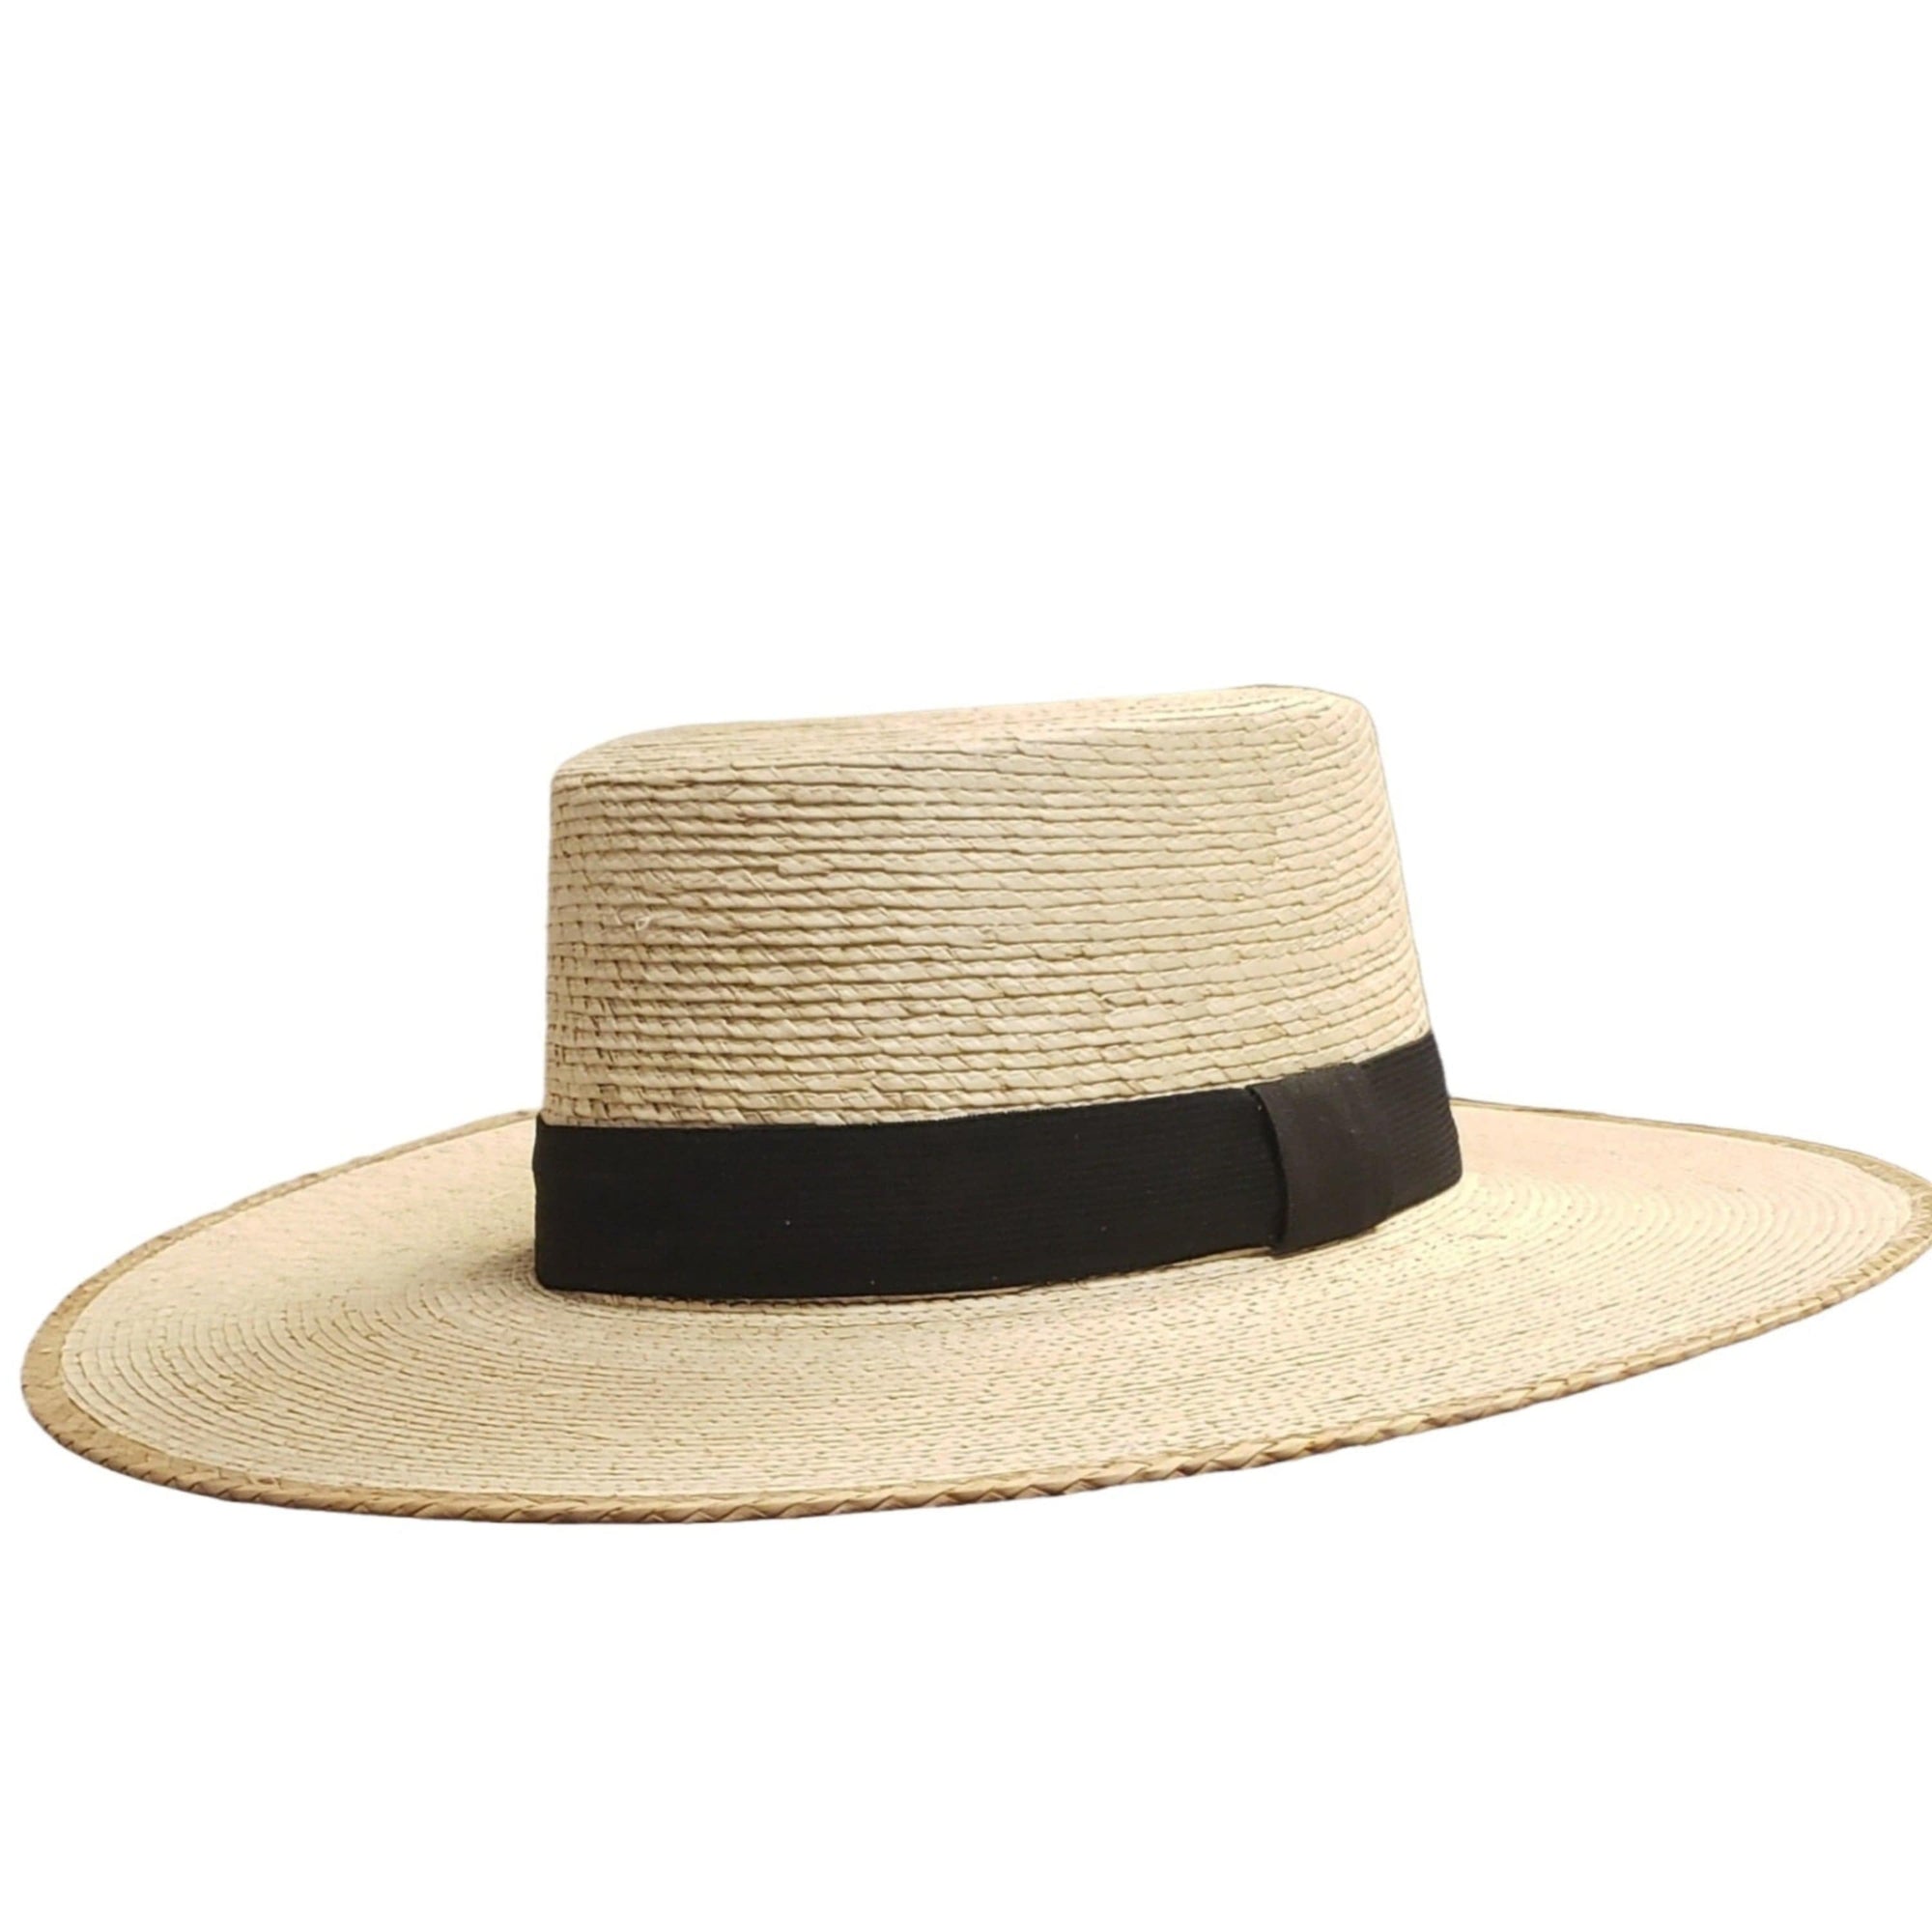 Gone Country Hats Men & Women's Hats Medium  fits 7-1/8 to 7-1/4 Bolero Natural - Palm